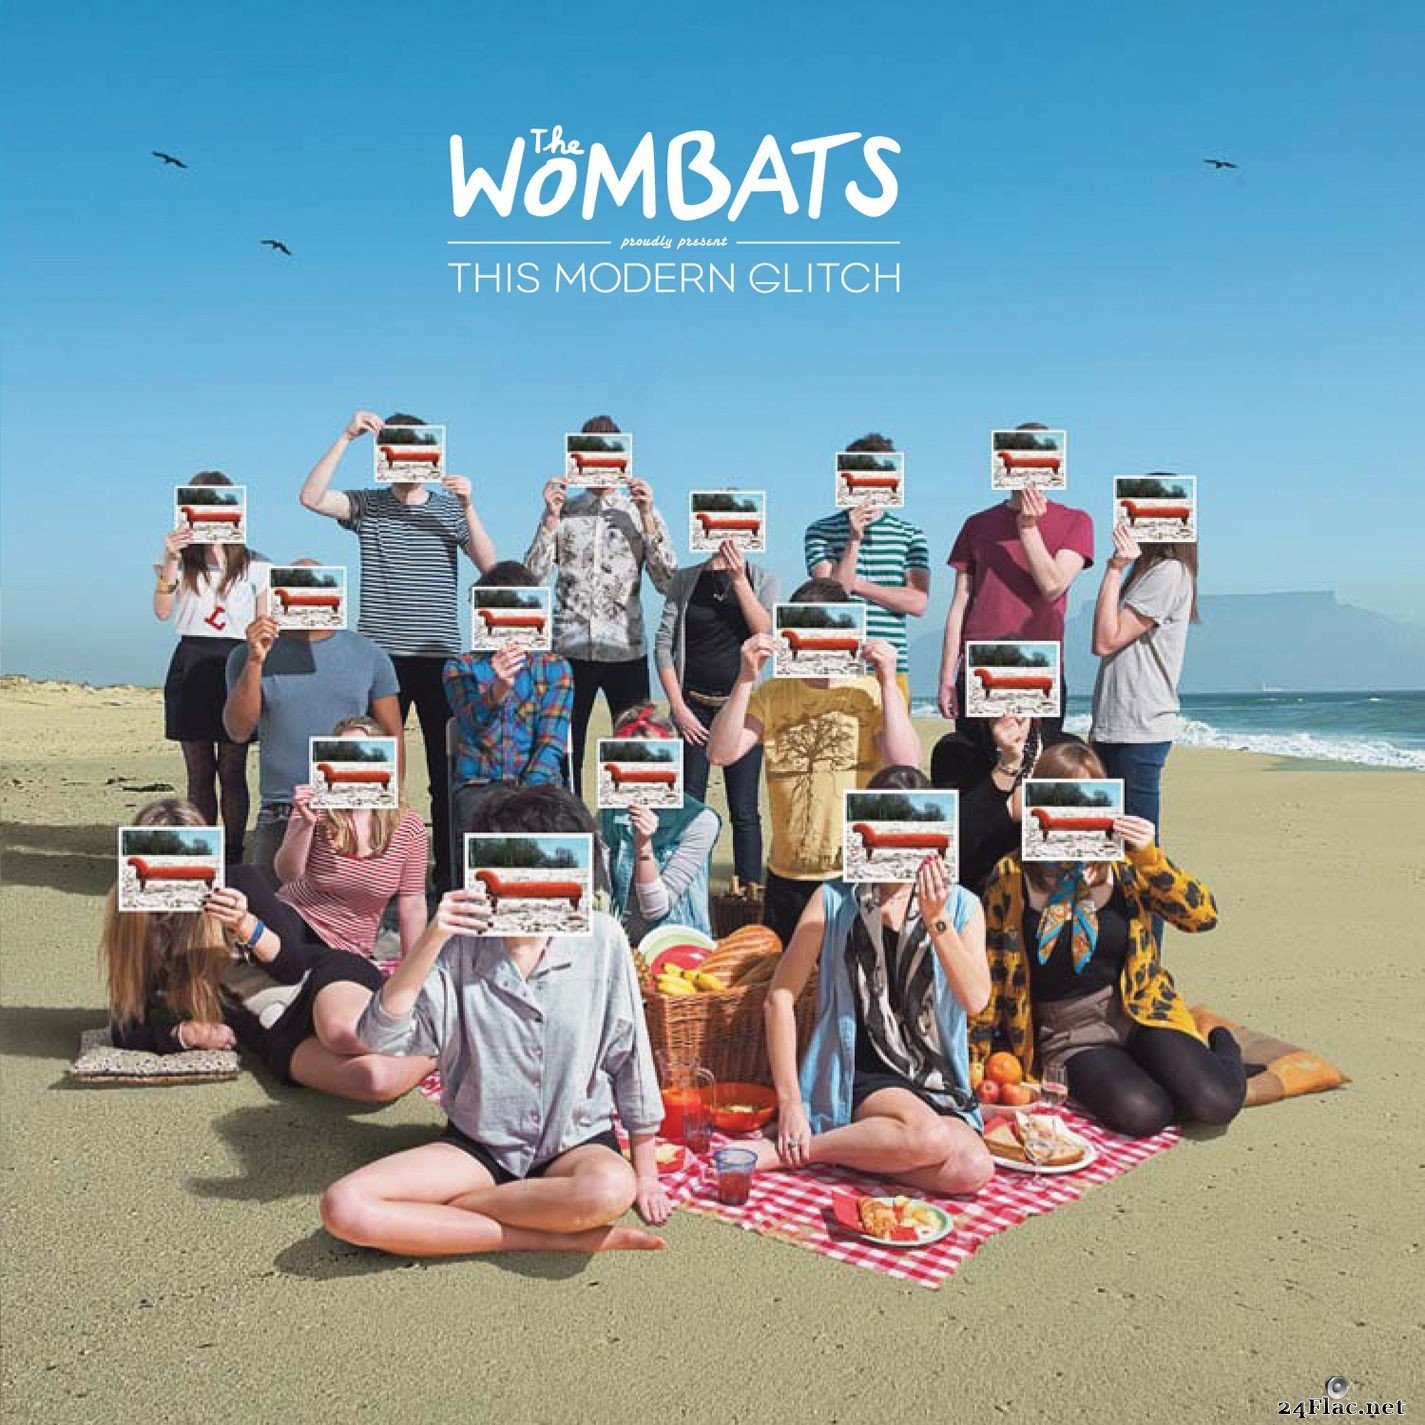 The Wombats - The Wombats Proudly Present... This Modern Glitch (10th Anniversary Edition) (2021) FLAC